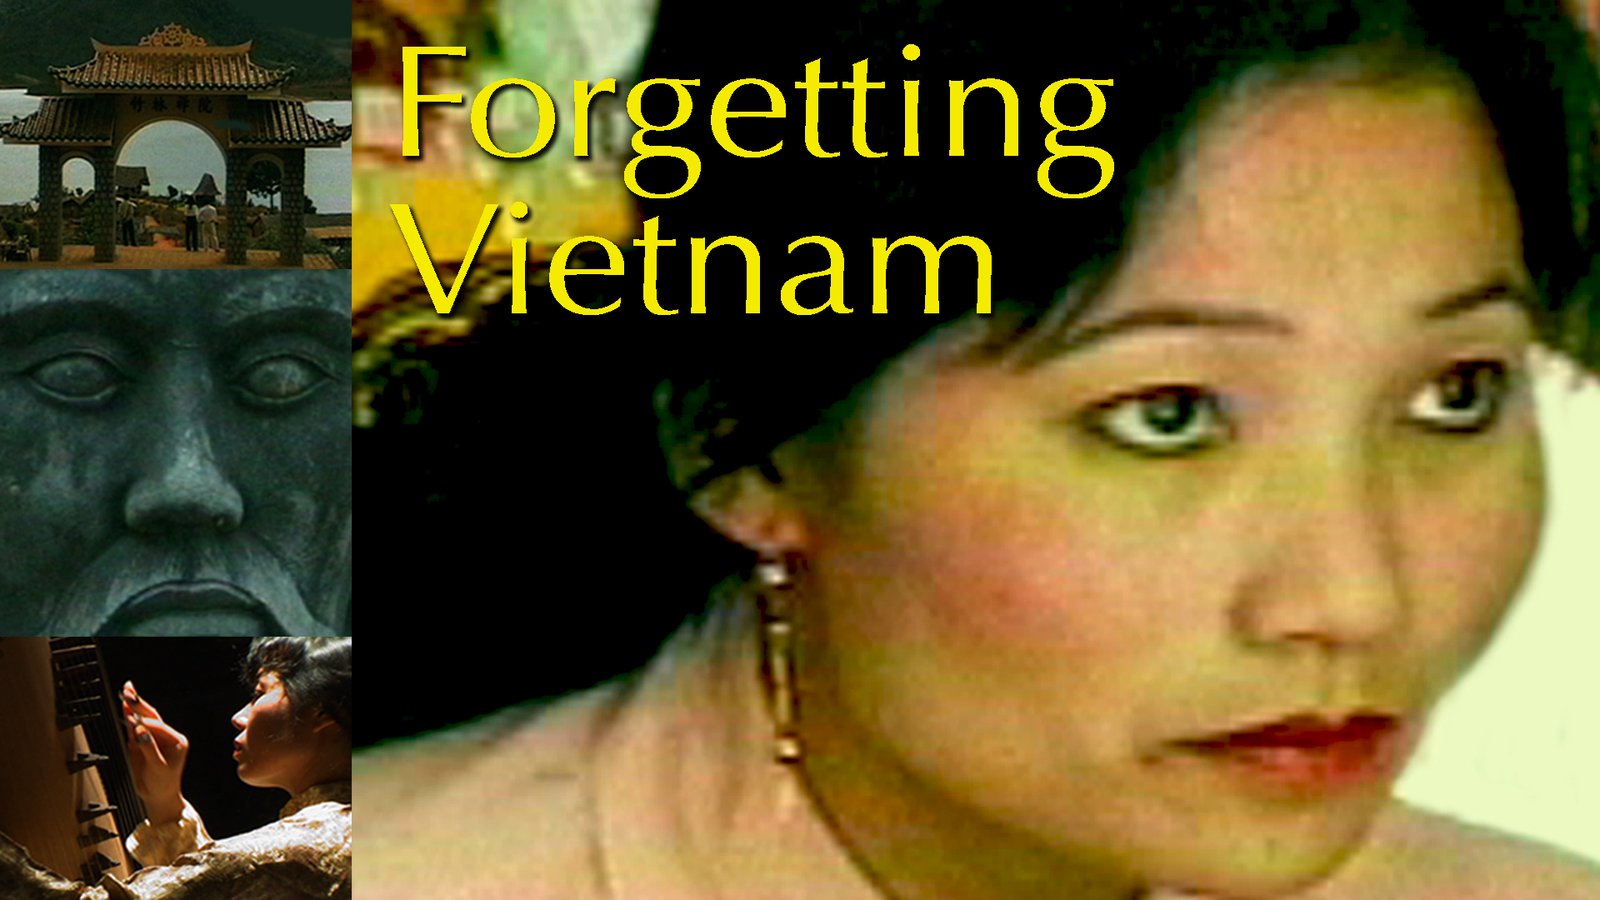 Forgetting Vietnam - A Film Essay Commemorating the 40th Anniversary of the end of the Vietnam War